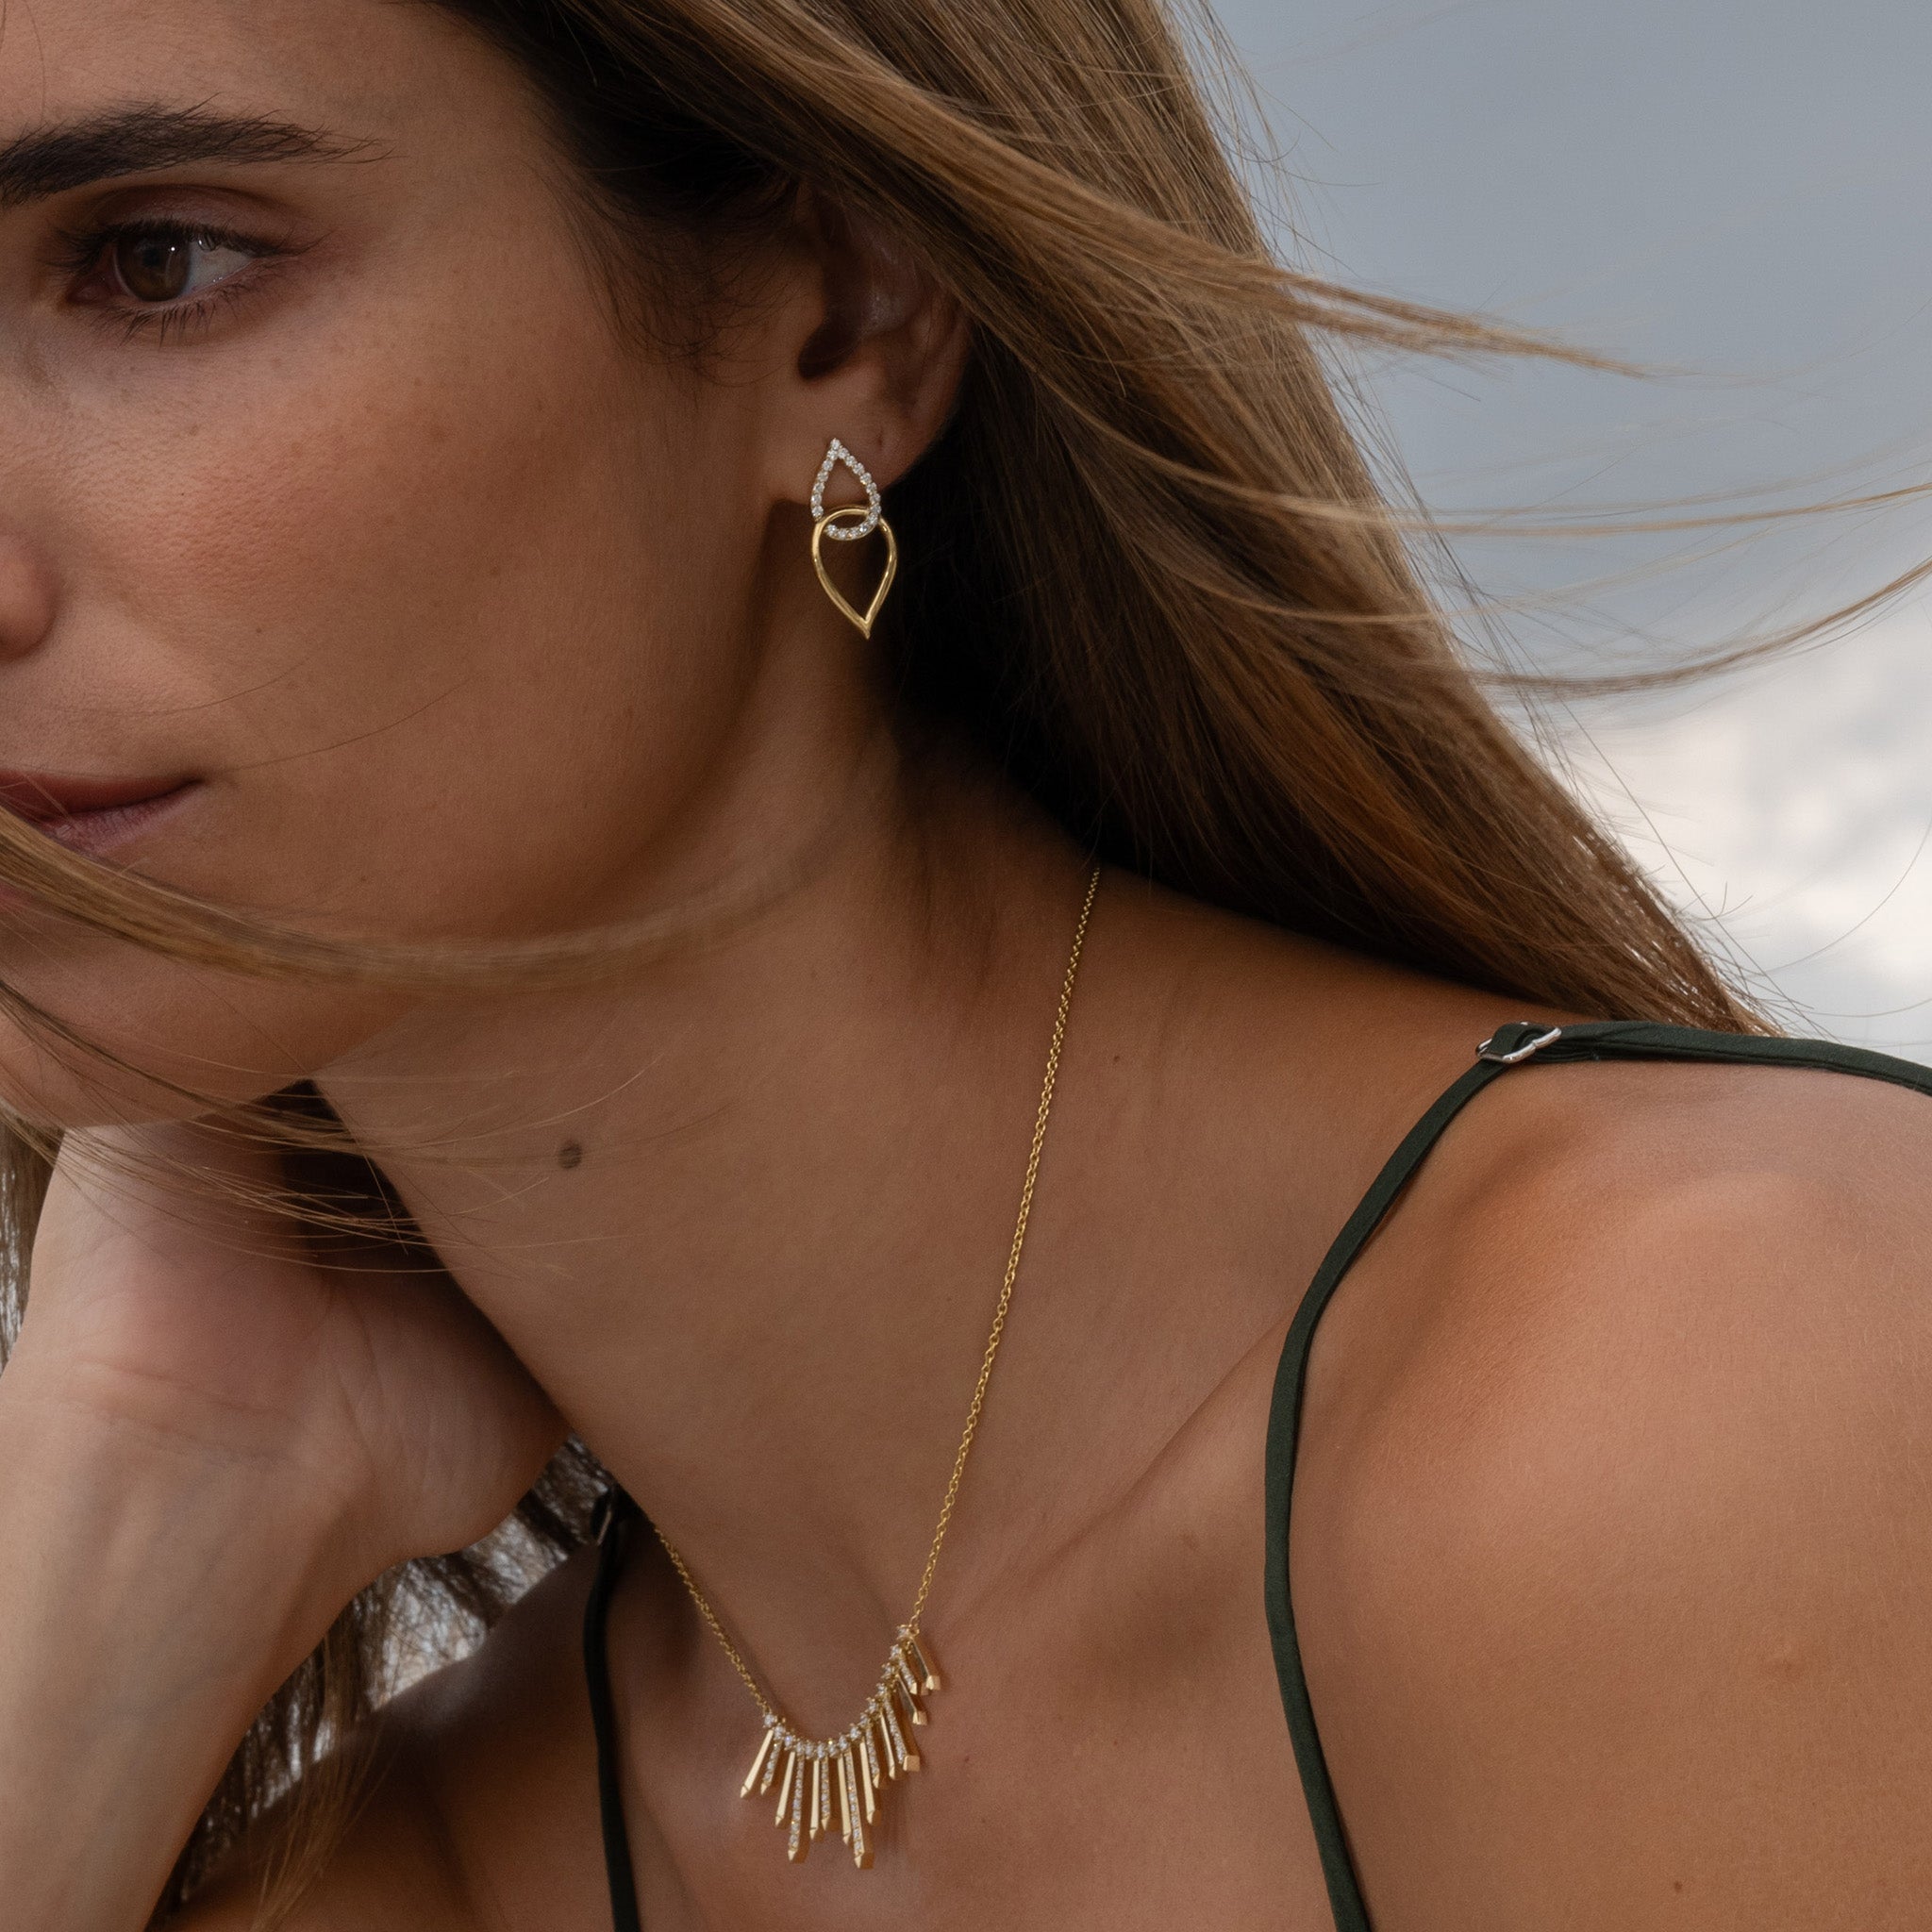 Yellow gold earrings inspired by sea knots, adorned with sparkling diamonds, showcased on model.